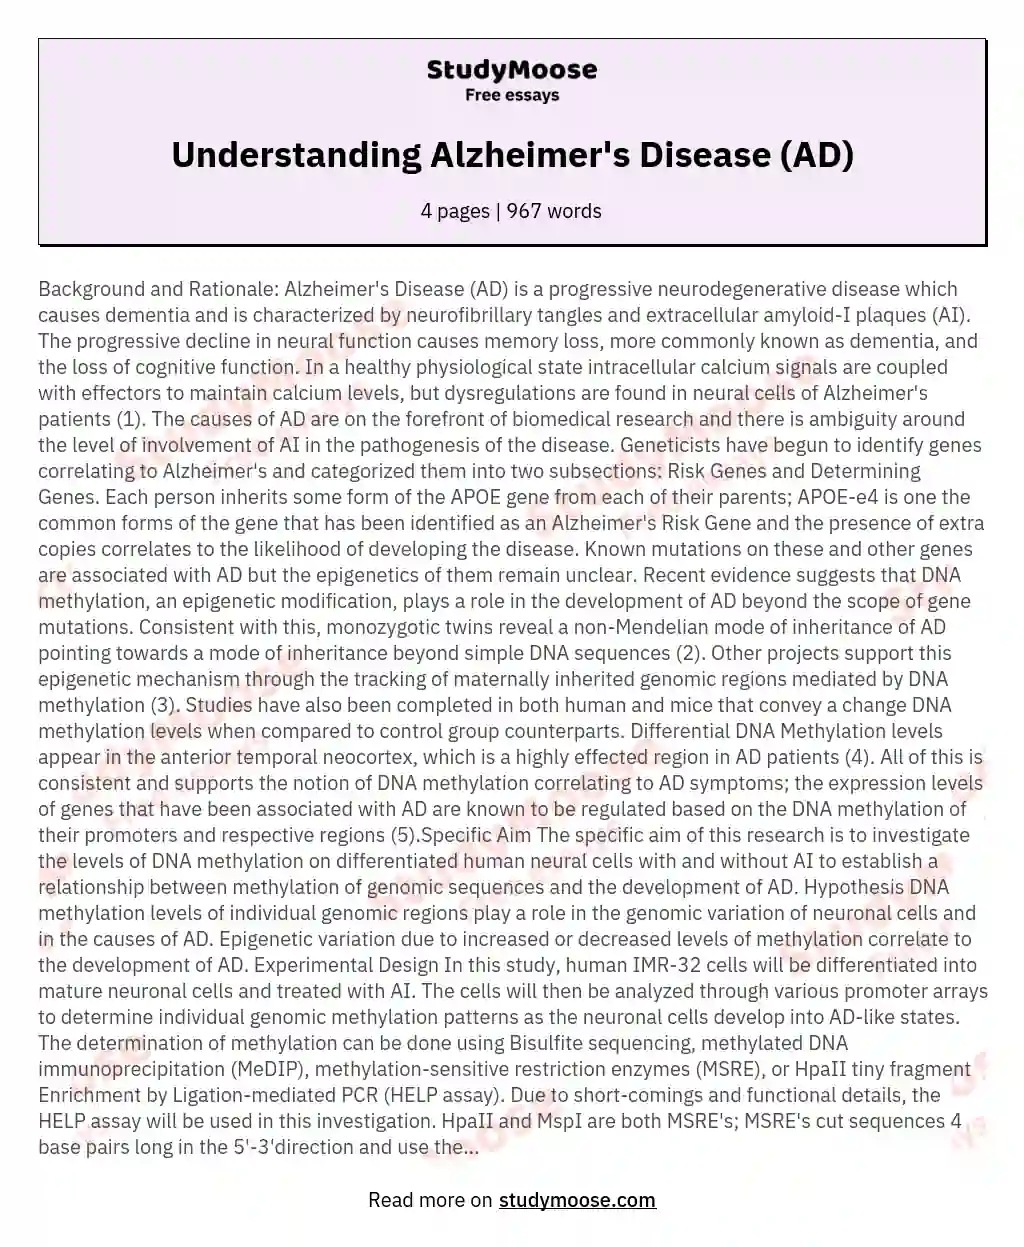 Background and Rationale Alzheimer's Disease AD is a progressive neurodegenerative disease which causes